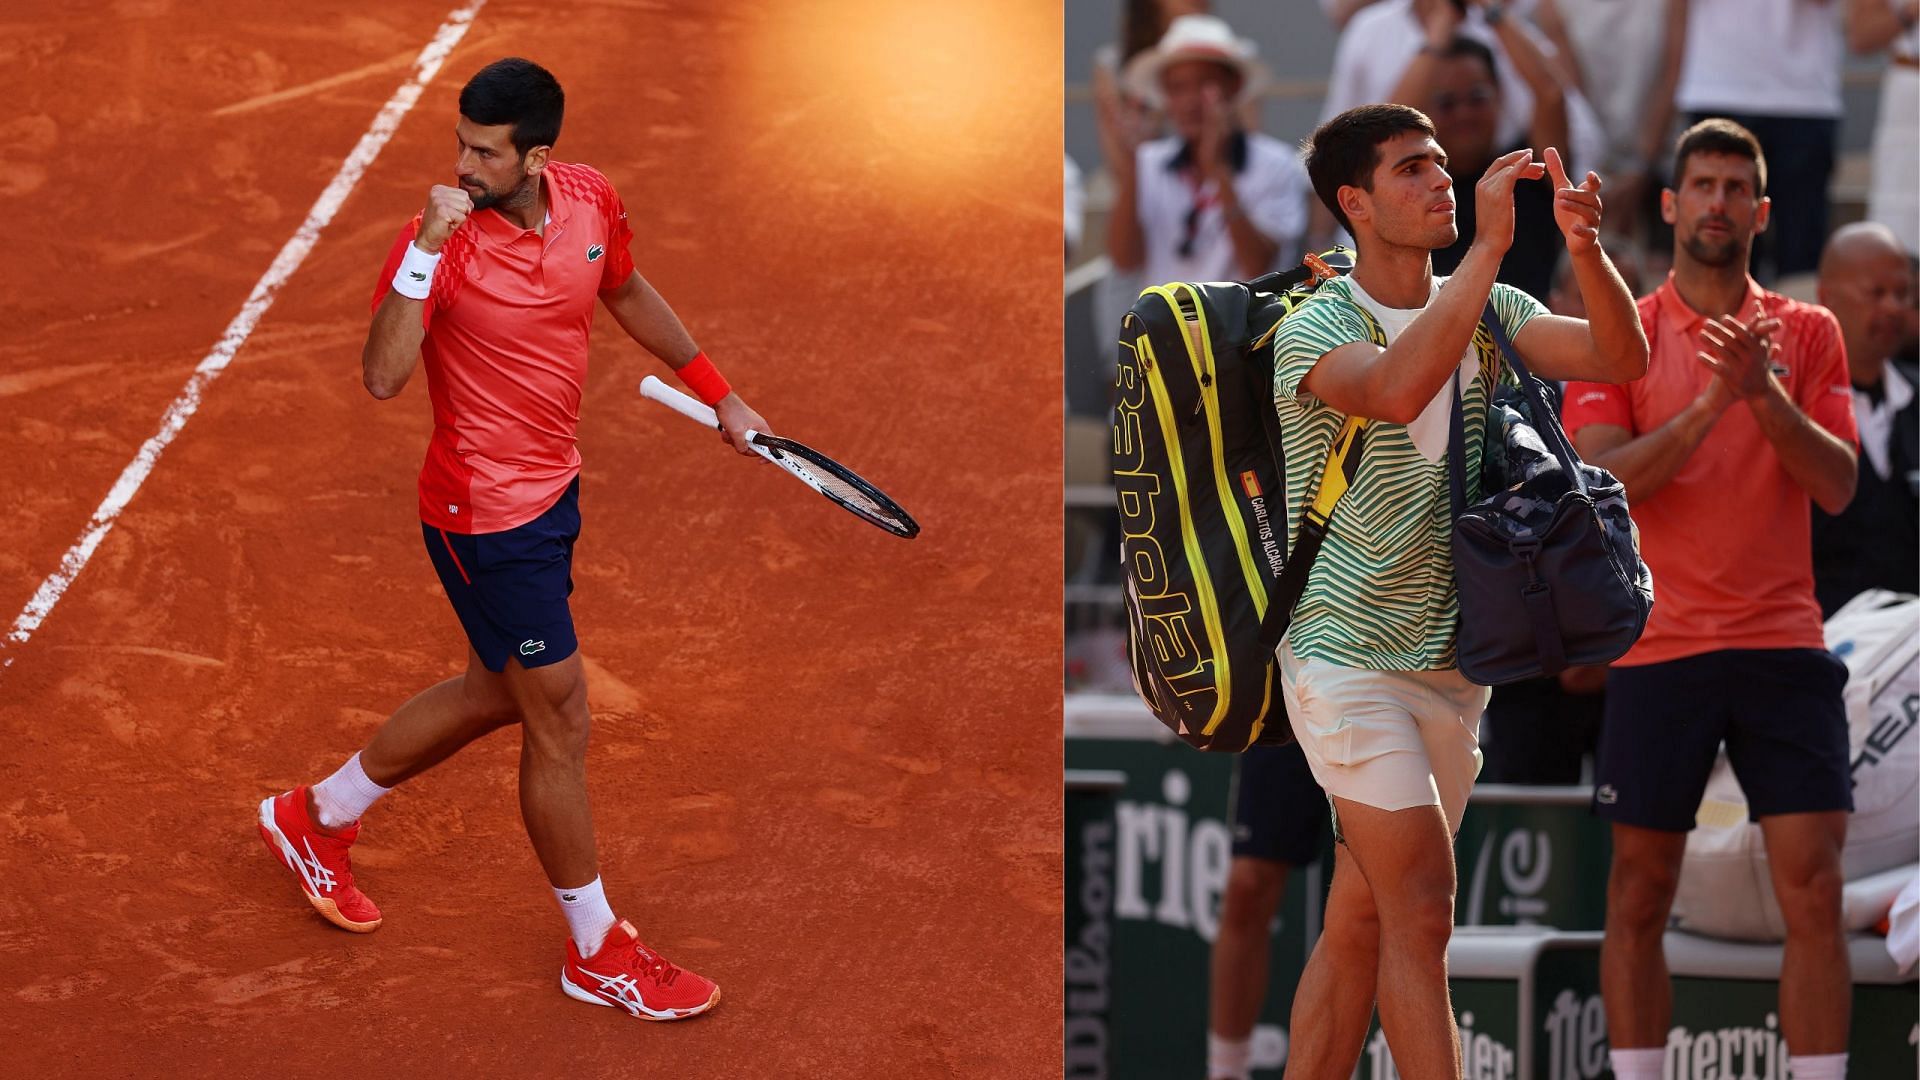 Novak Djokovic had comforting words for Carloz Alcaraz after their 2023 French open semifinal clash.